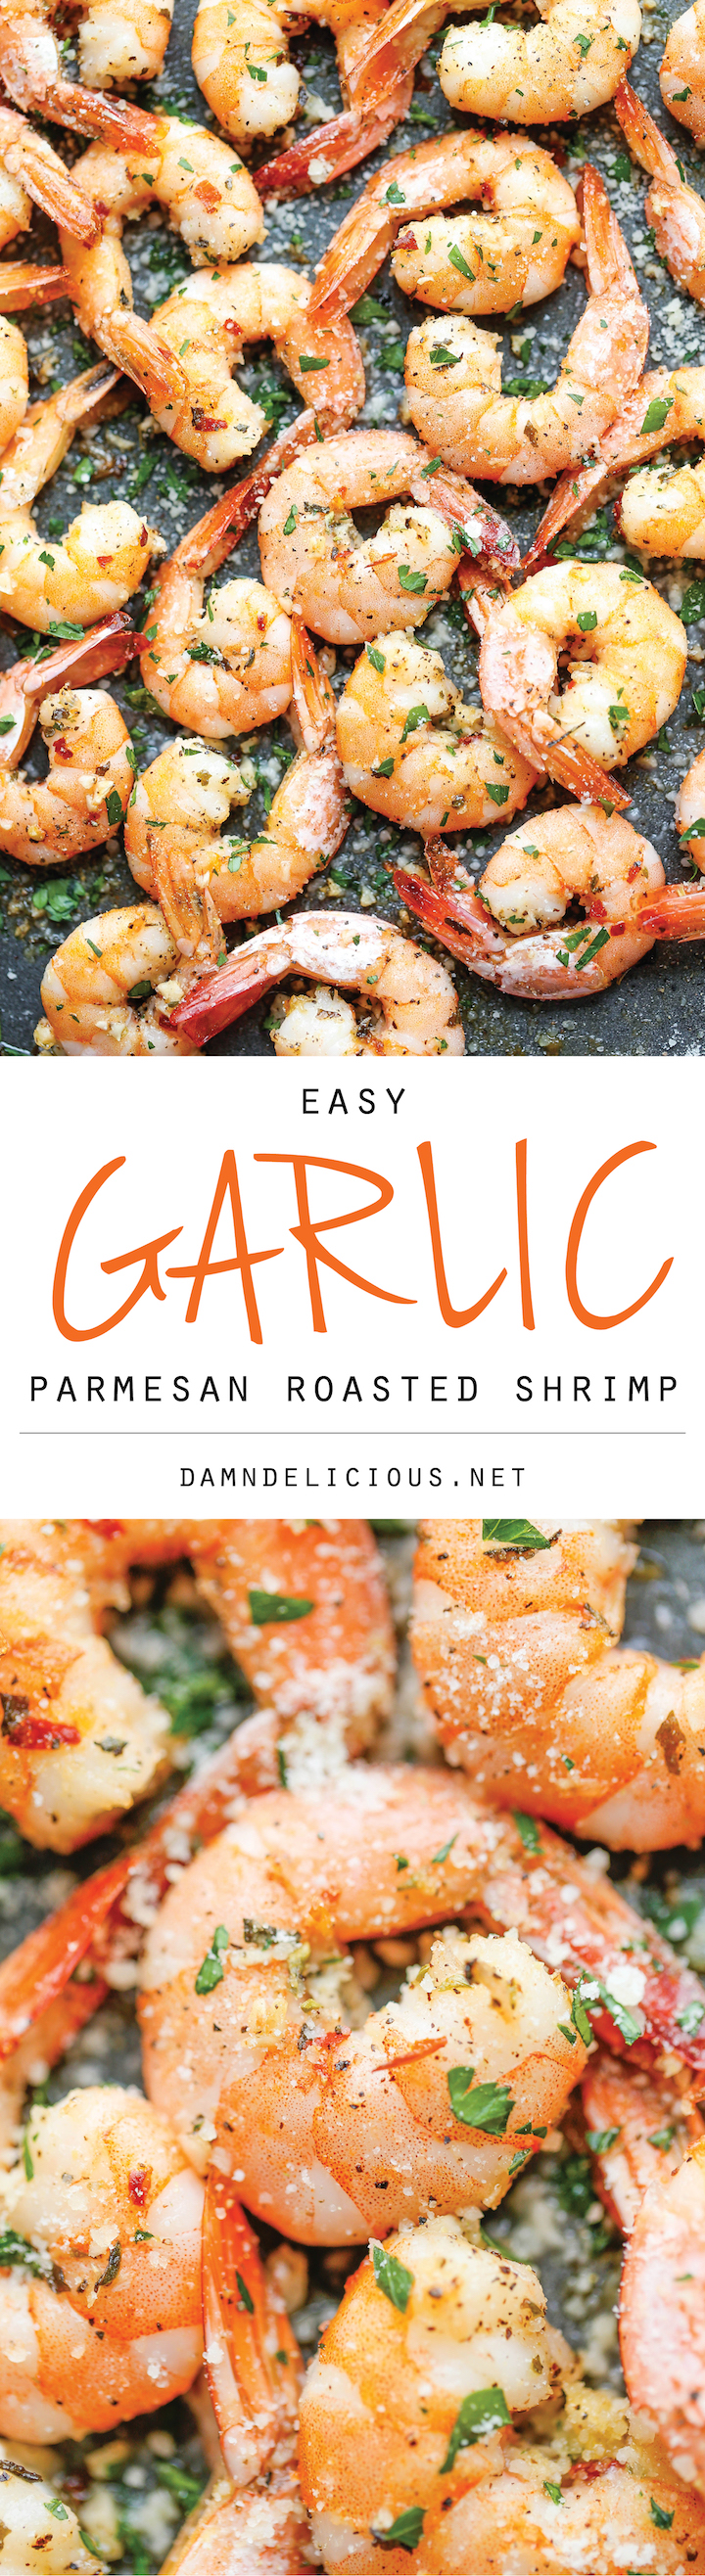 Garlic Parmesan Roasted Shrimp - The easiest roasted shrimp cocktail ever made with just 5 min prep. Yes, it's just that easy!